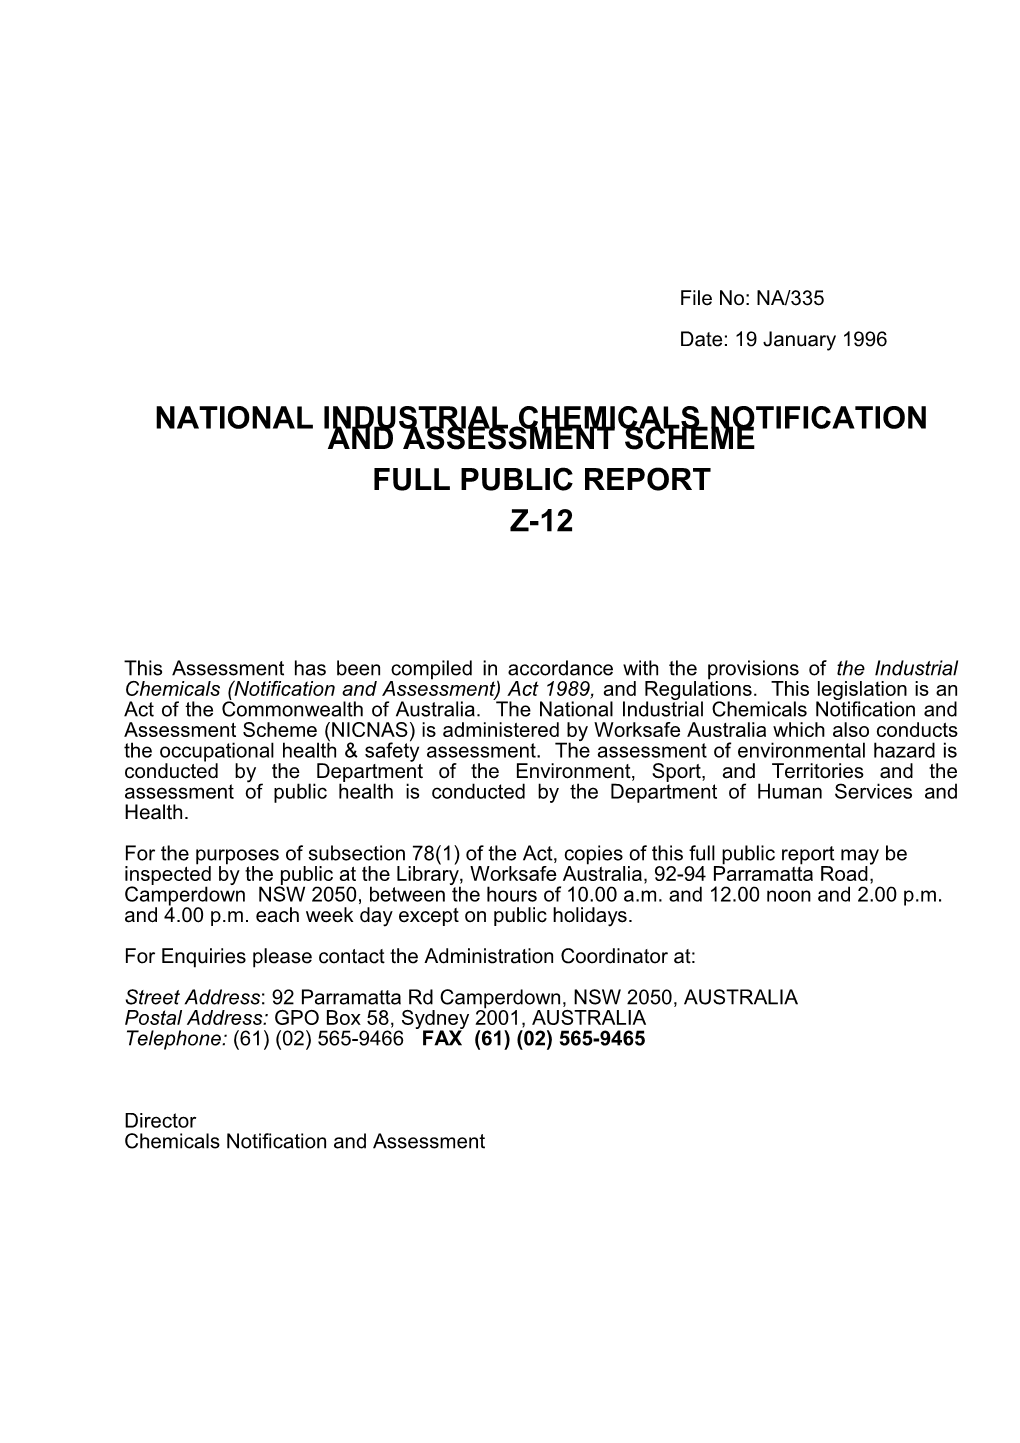 National Industrial Chemicals Notification s7